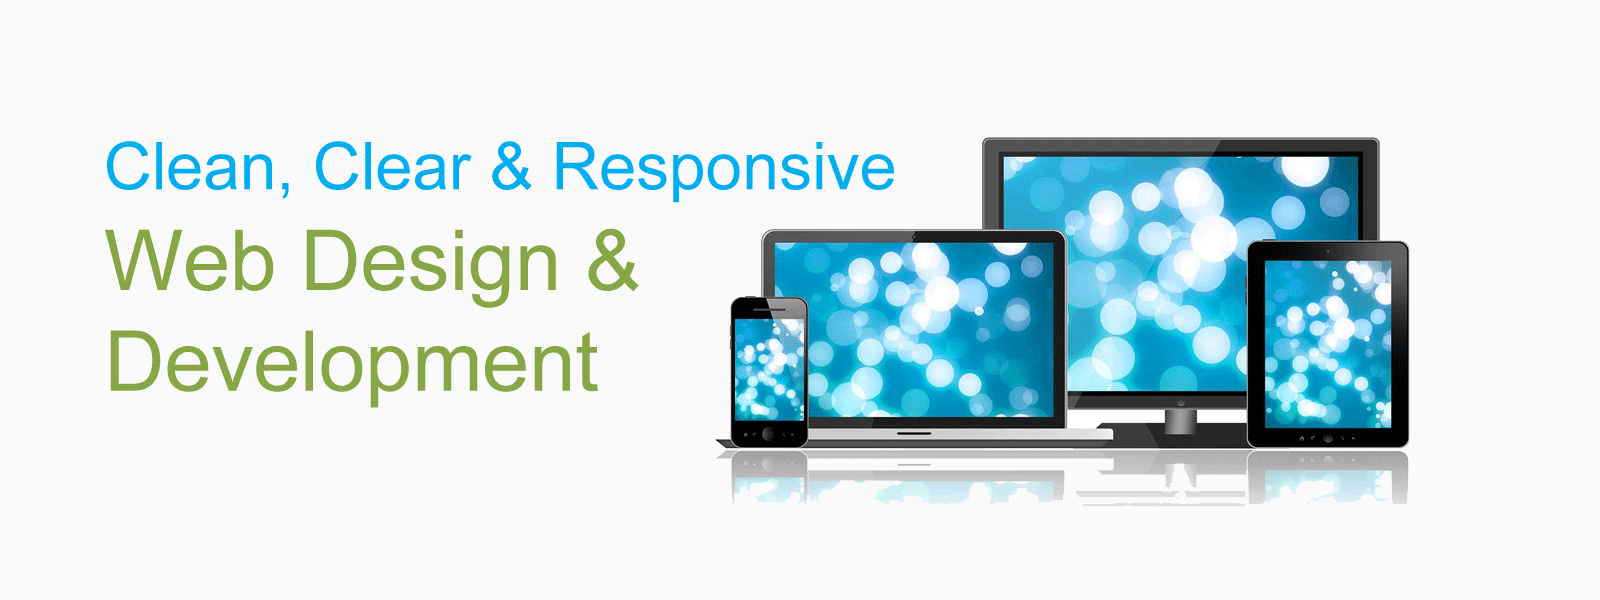 Clean Clear Responsive Wesb Design and Development